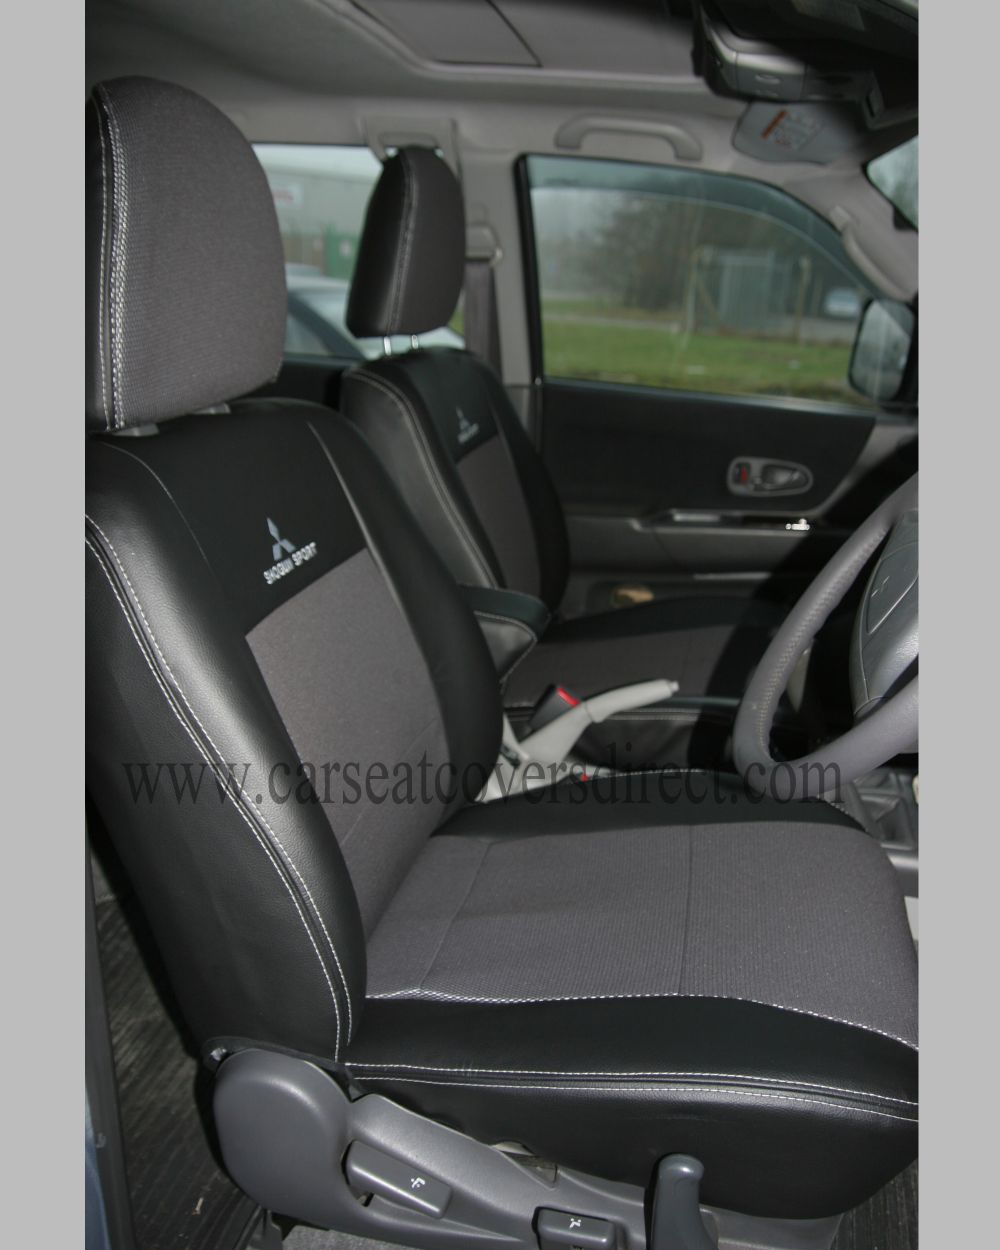 Drivers seat with seat cover